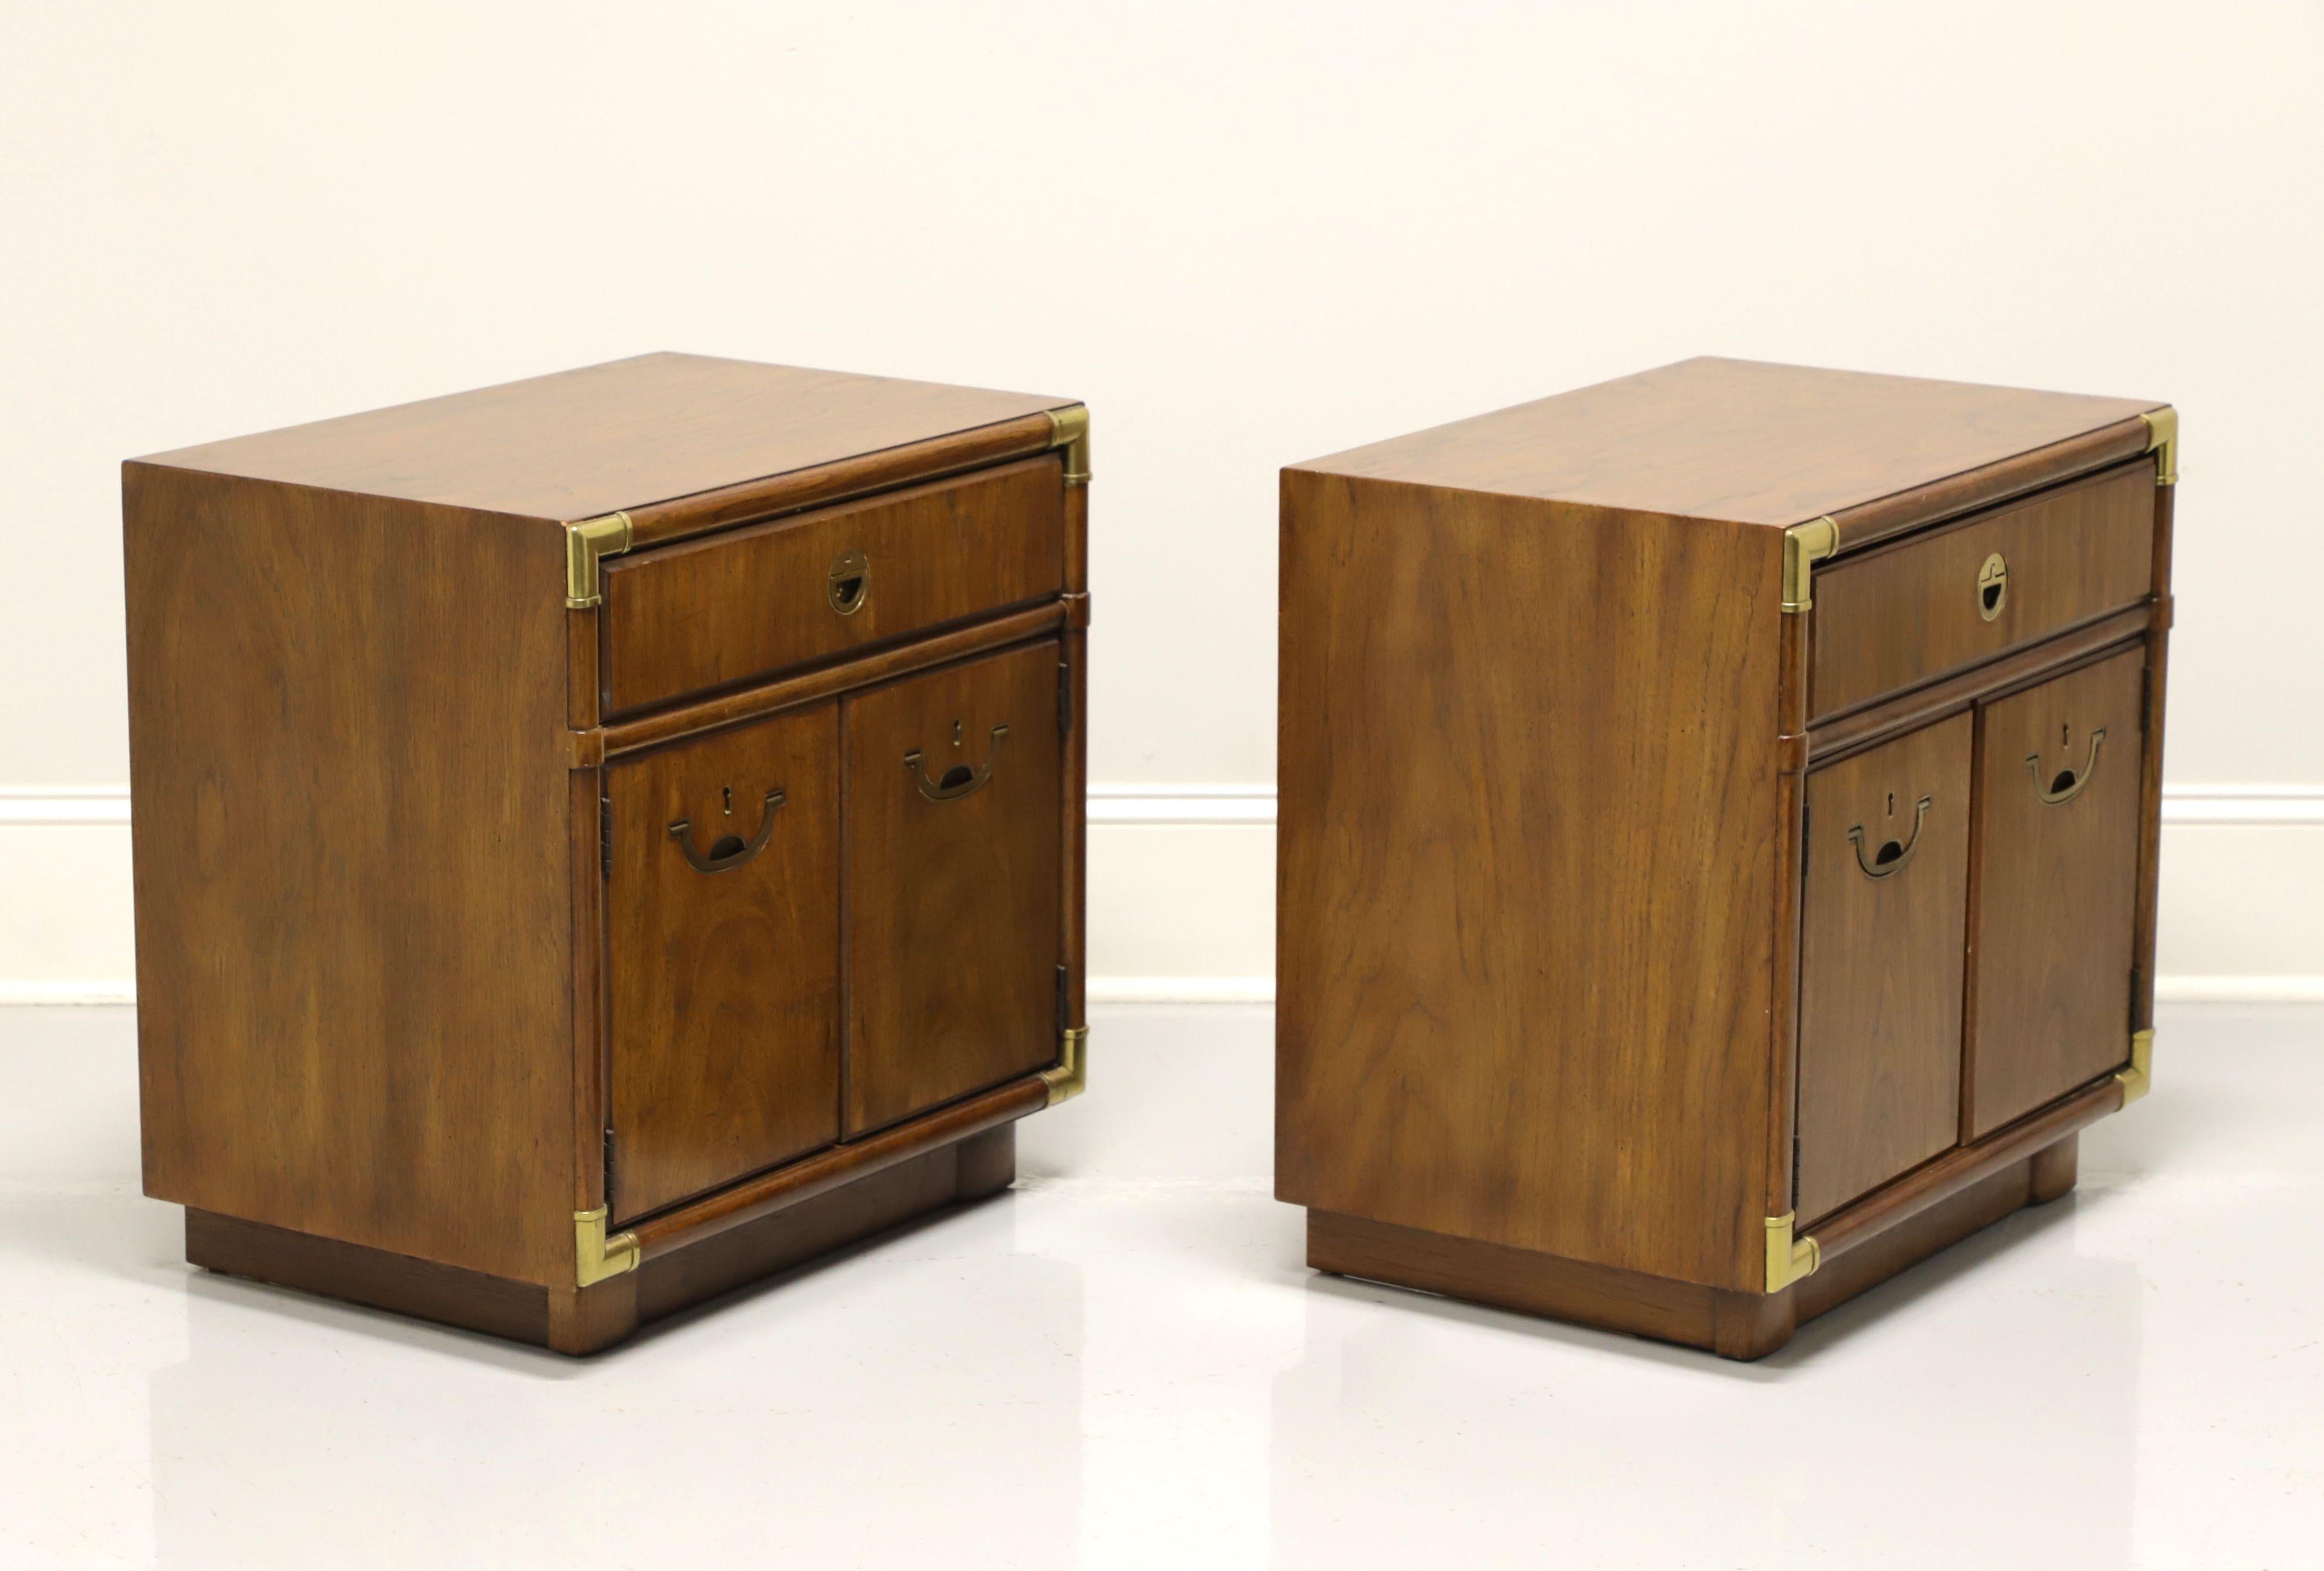 A pair of Campaign style nightstands by Drexel Heritage, from their Accolade Collection. Pecan with brass hardware and decorative accents. Features one drawer of dovetail construction over a two door cabinet with faux lockplates revealing a storage